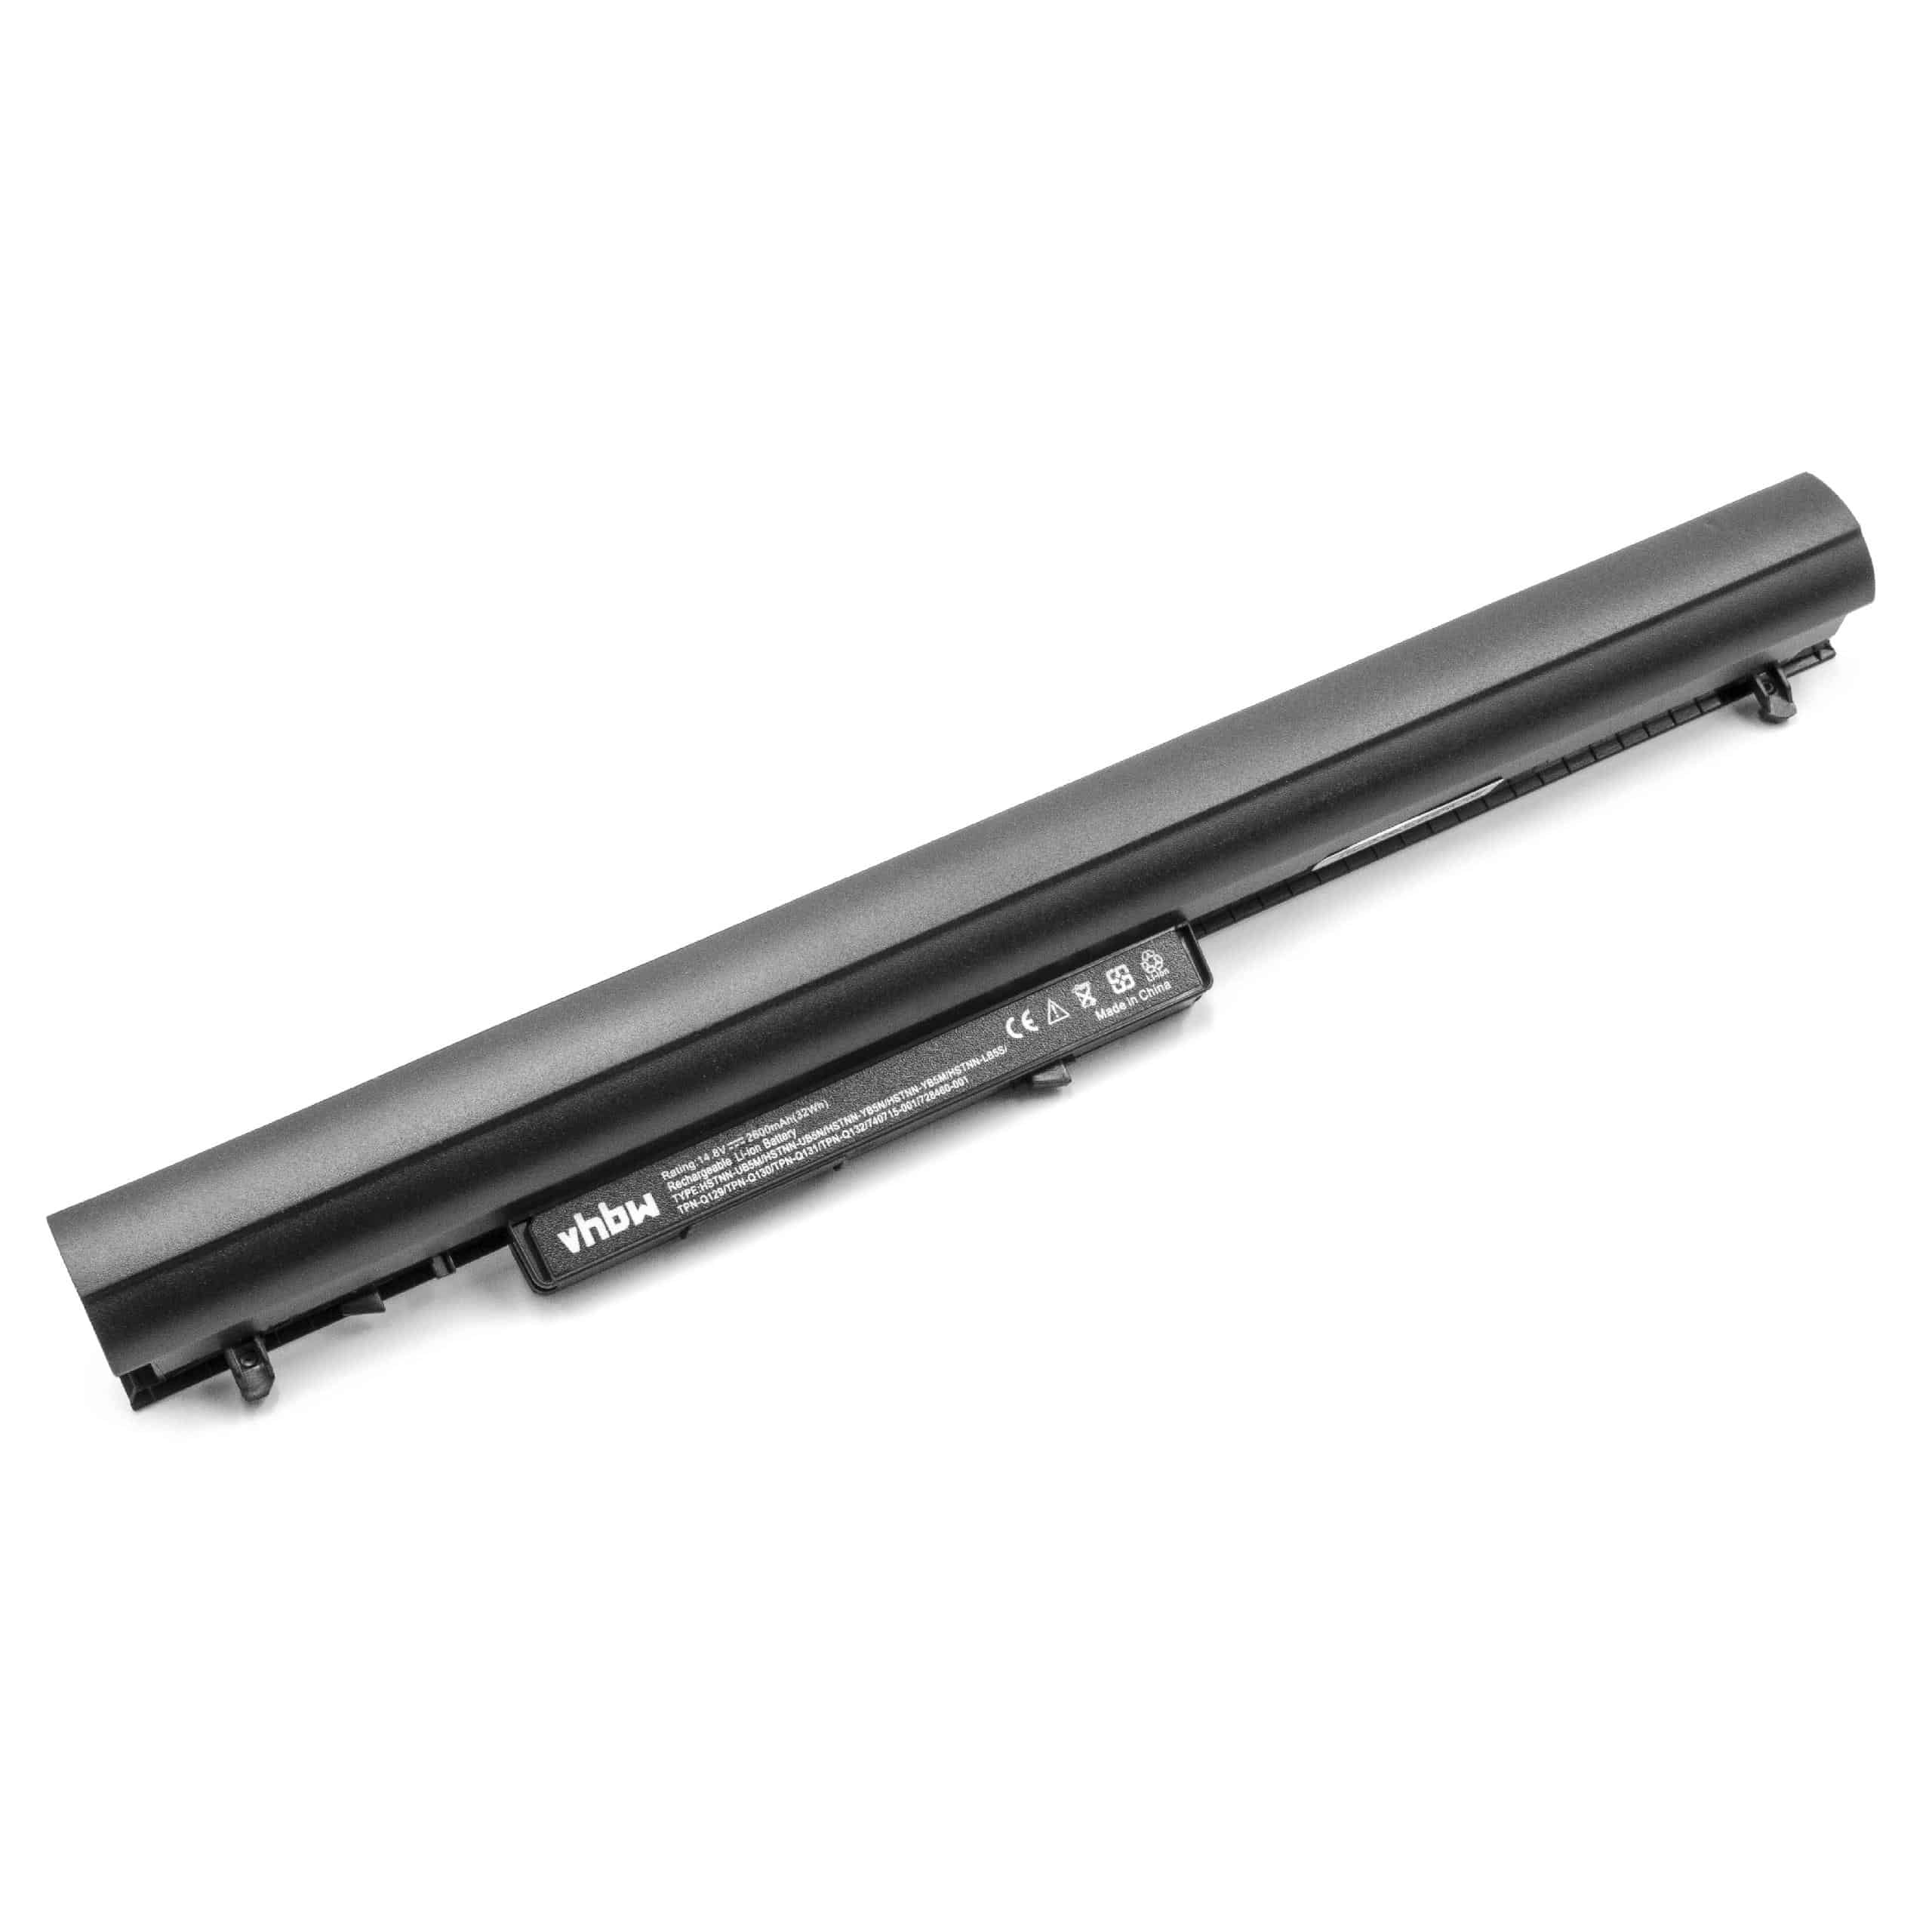 Notebook Battery Replacement for HP 728248-221, 728248-141, 728248-121 - 2600mAh 14.8V Li-Ion, black